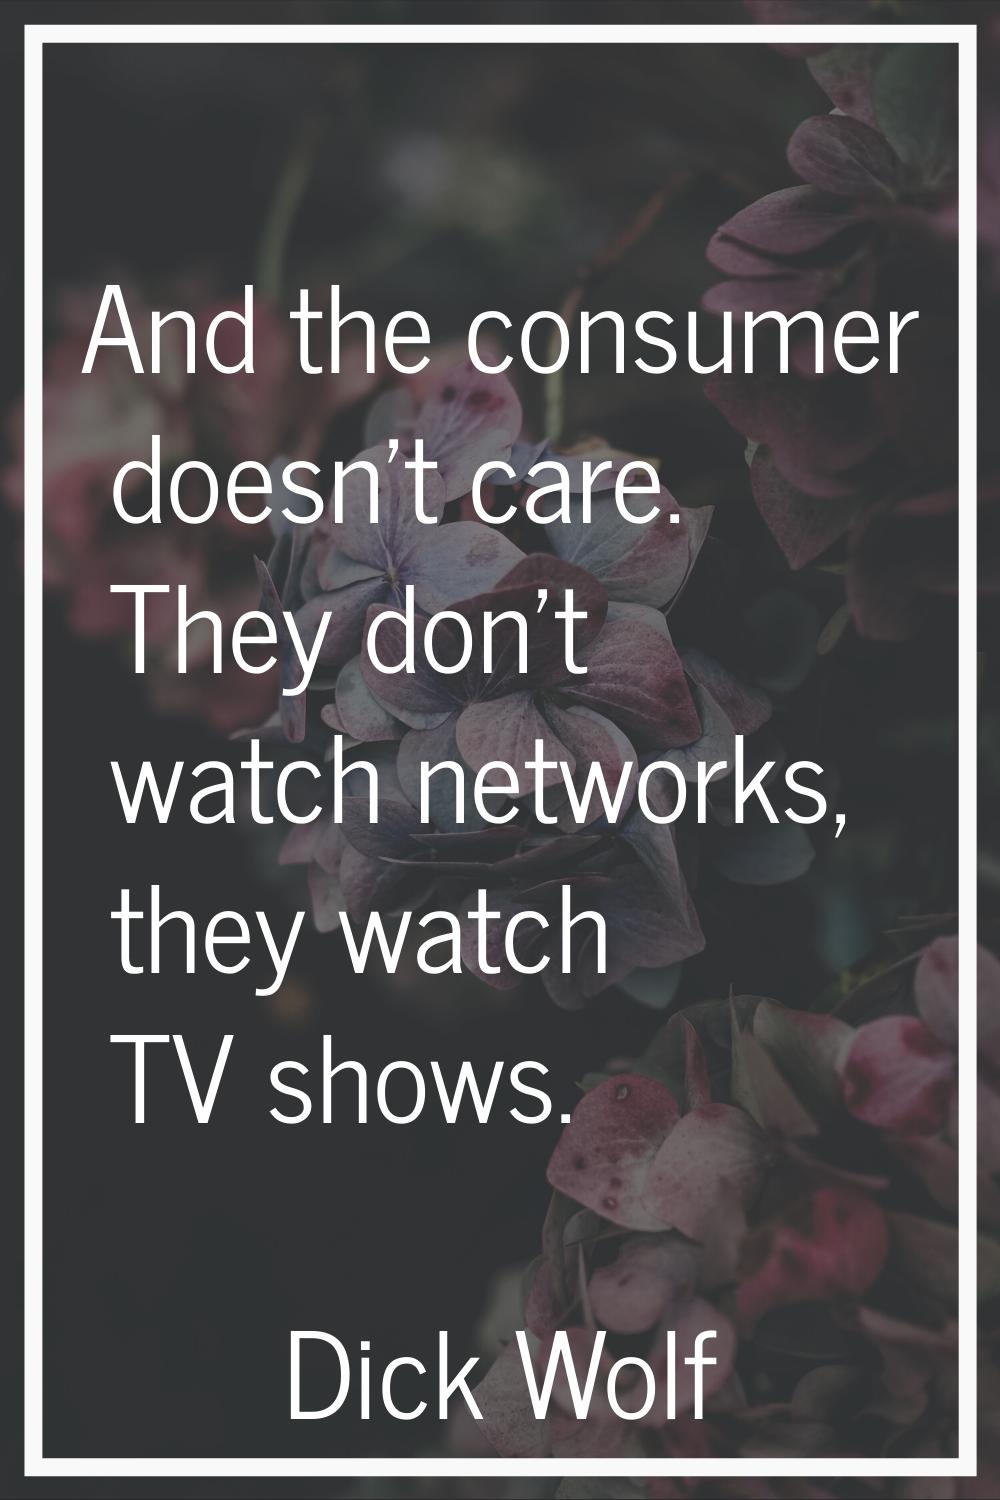 And the consumer doesn't care. They don't watch networks, they watch TV shows.